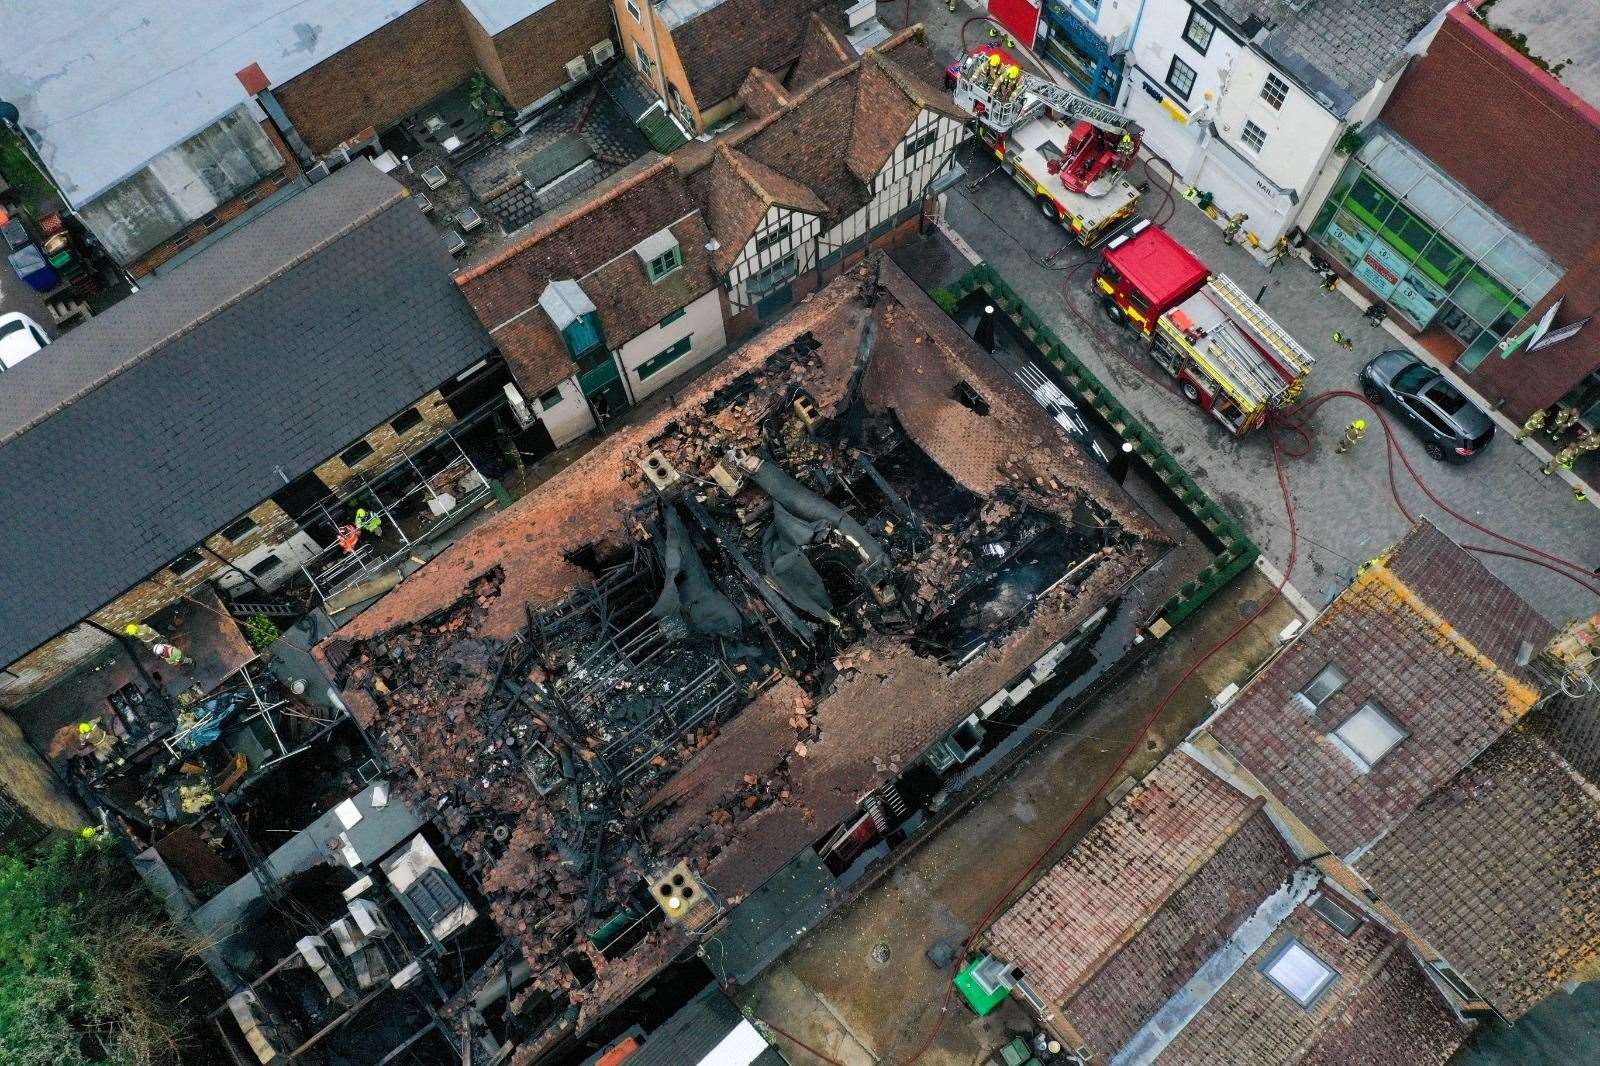 A drone image shows the extent of the fire damage. Picture: UKNIP